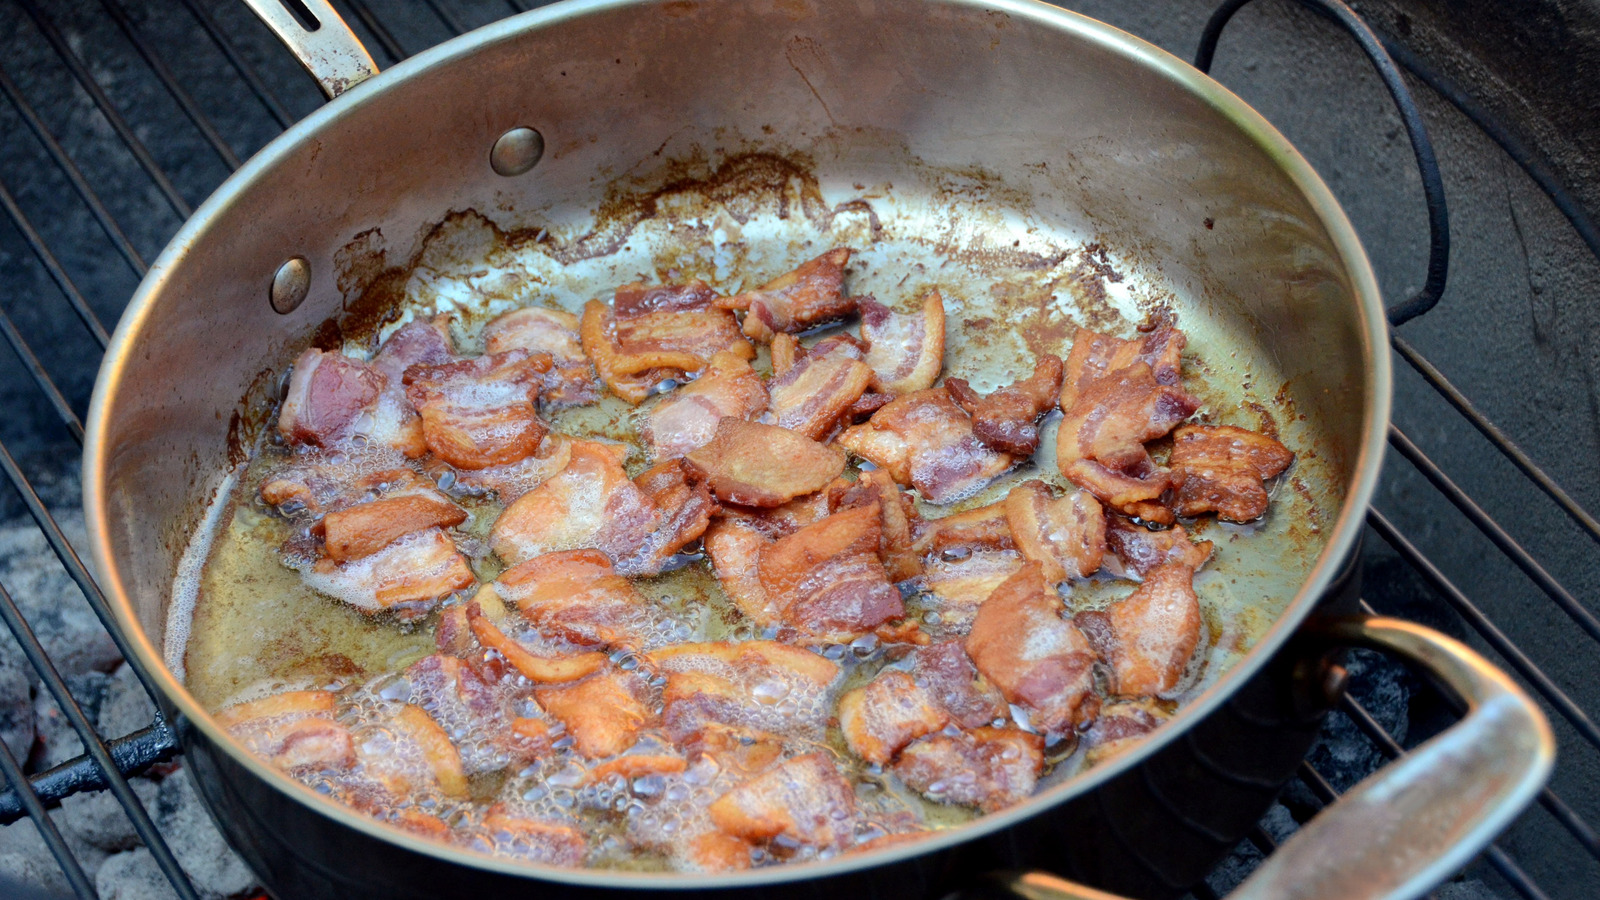 https://www.foodrepublic.com/img/gallery/the-best-bacon-grease-substitute-when-youre-in-a-pinch/l-intro-1702422023.jpg